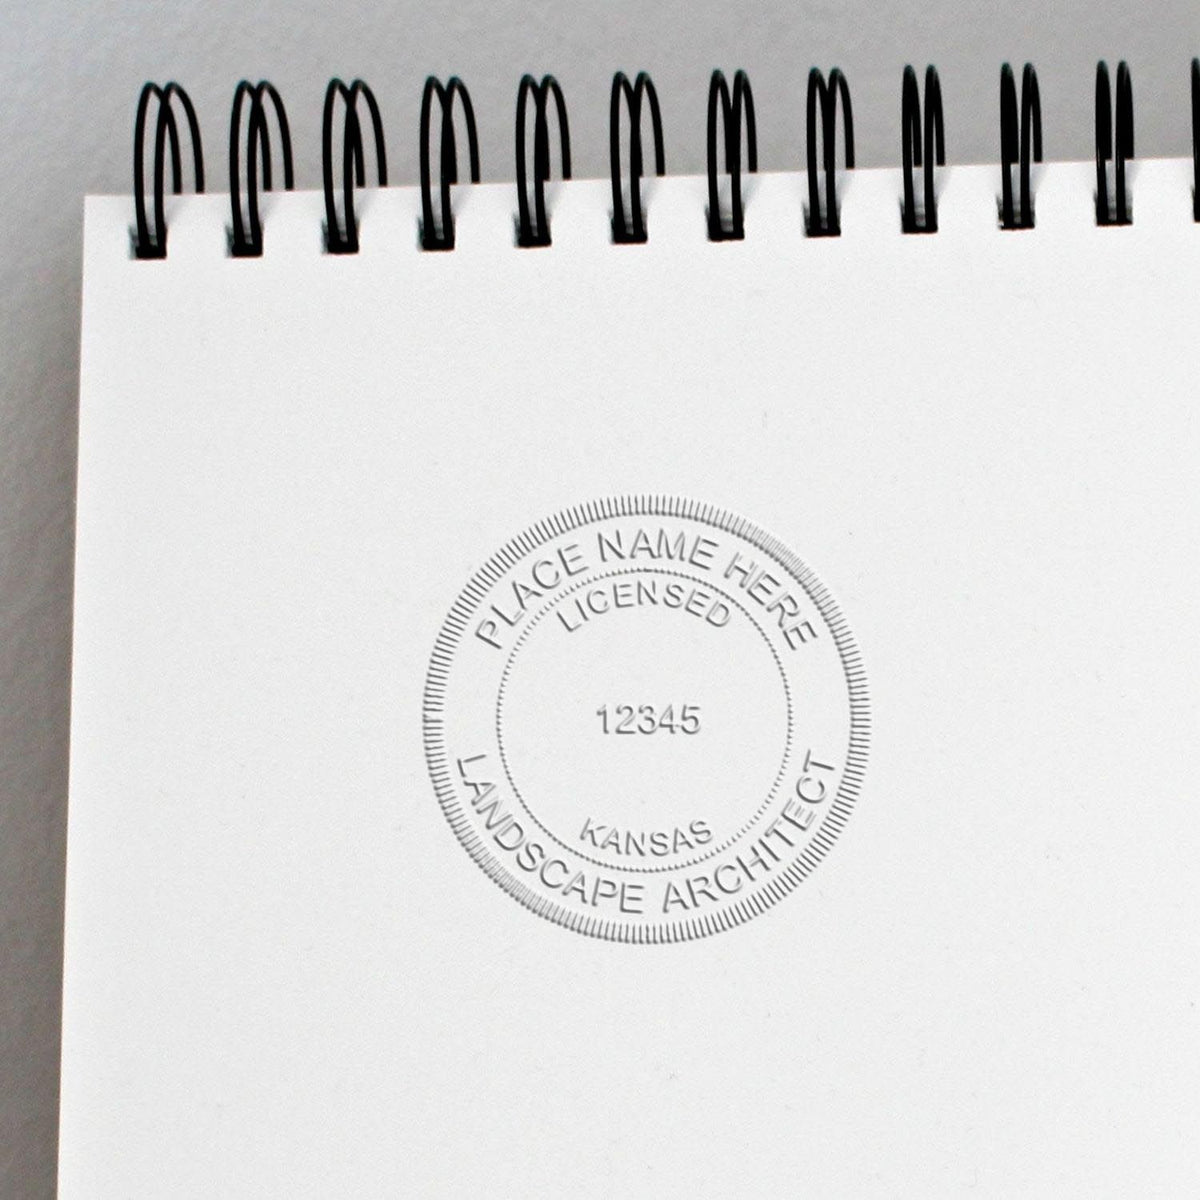 An alternative view of the Hybrid Kansas Landscape Architect Seal stamped on a sheet of paper showing the image in use